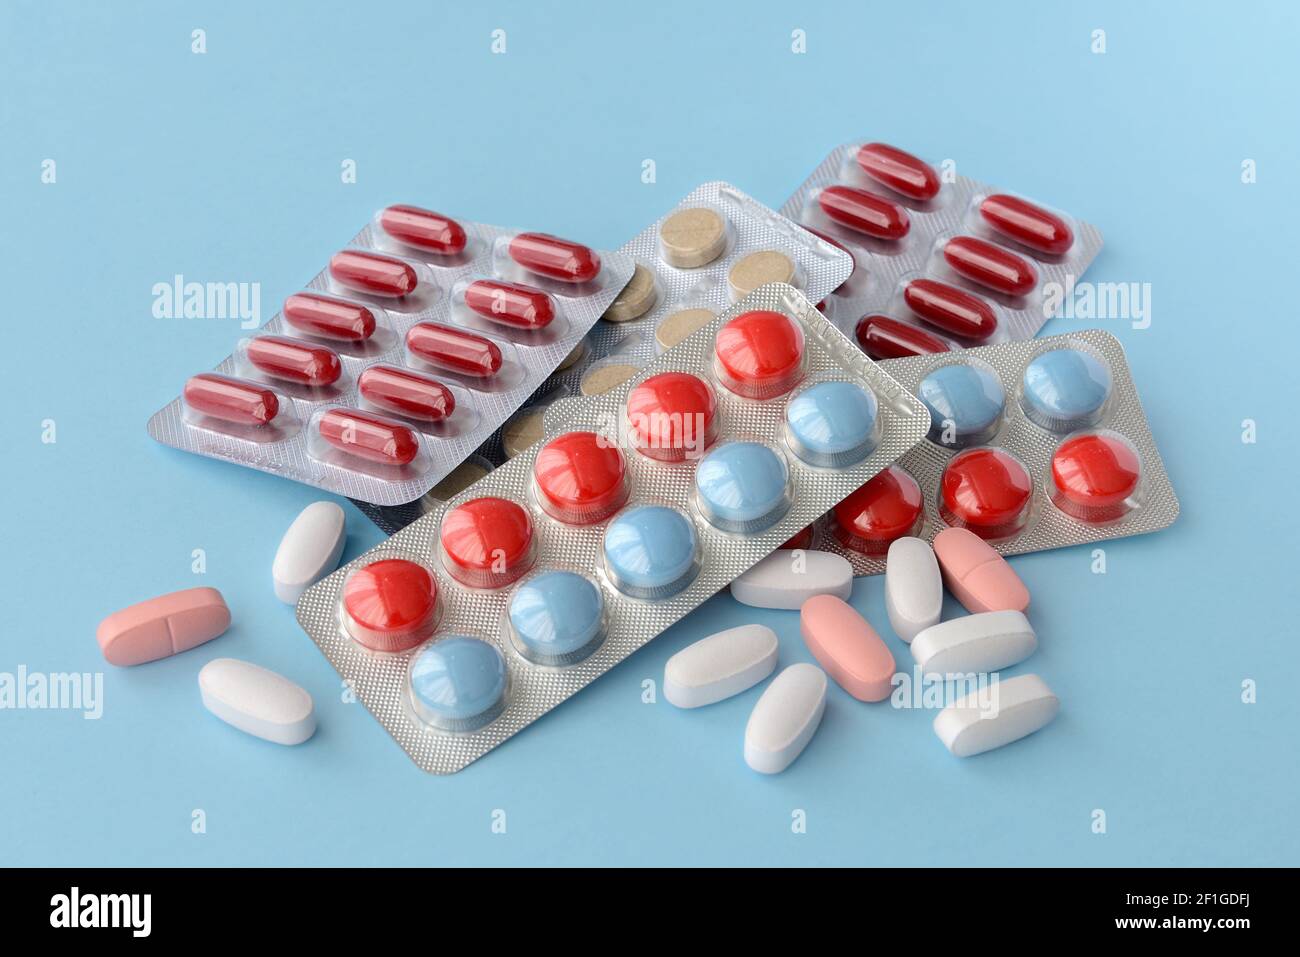 Assorted pharmaceutical medicine pills, tablets and capsules over blue background Stock Photo